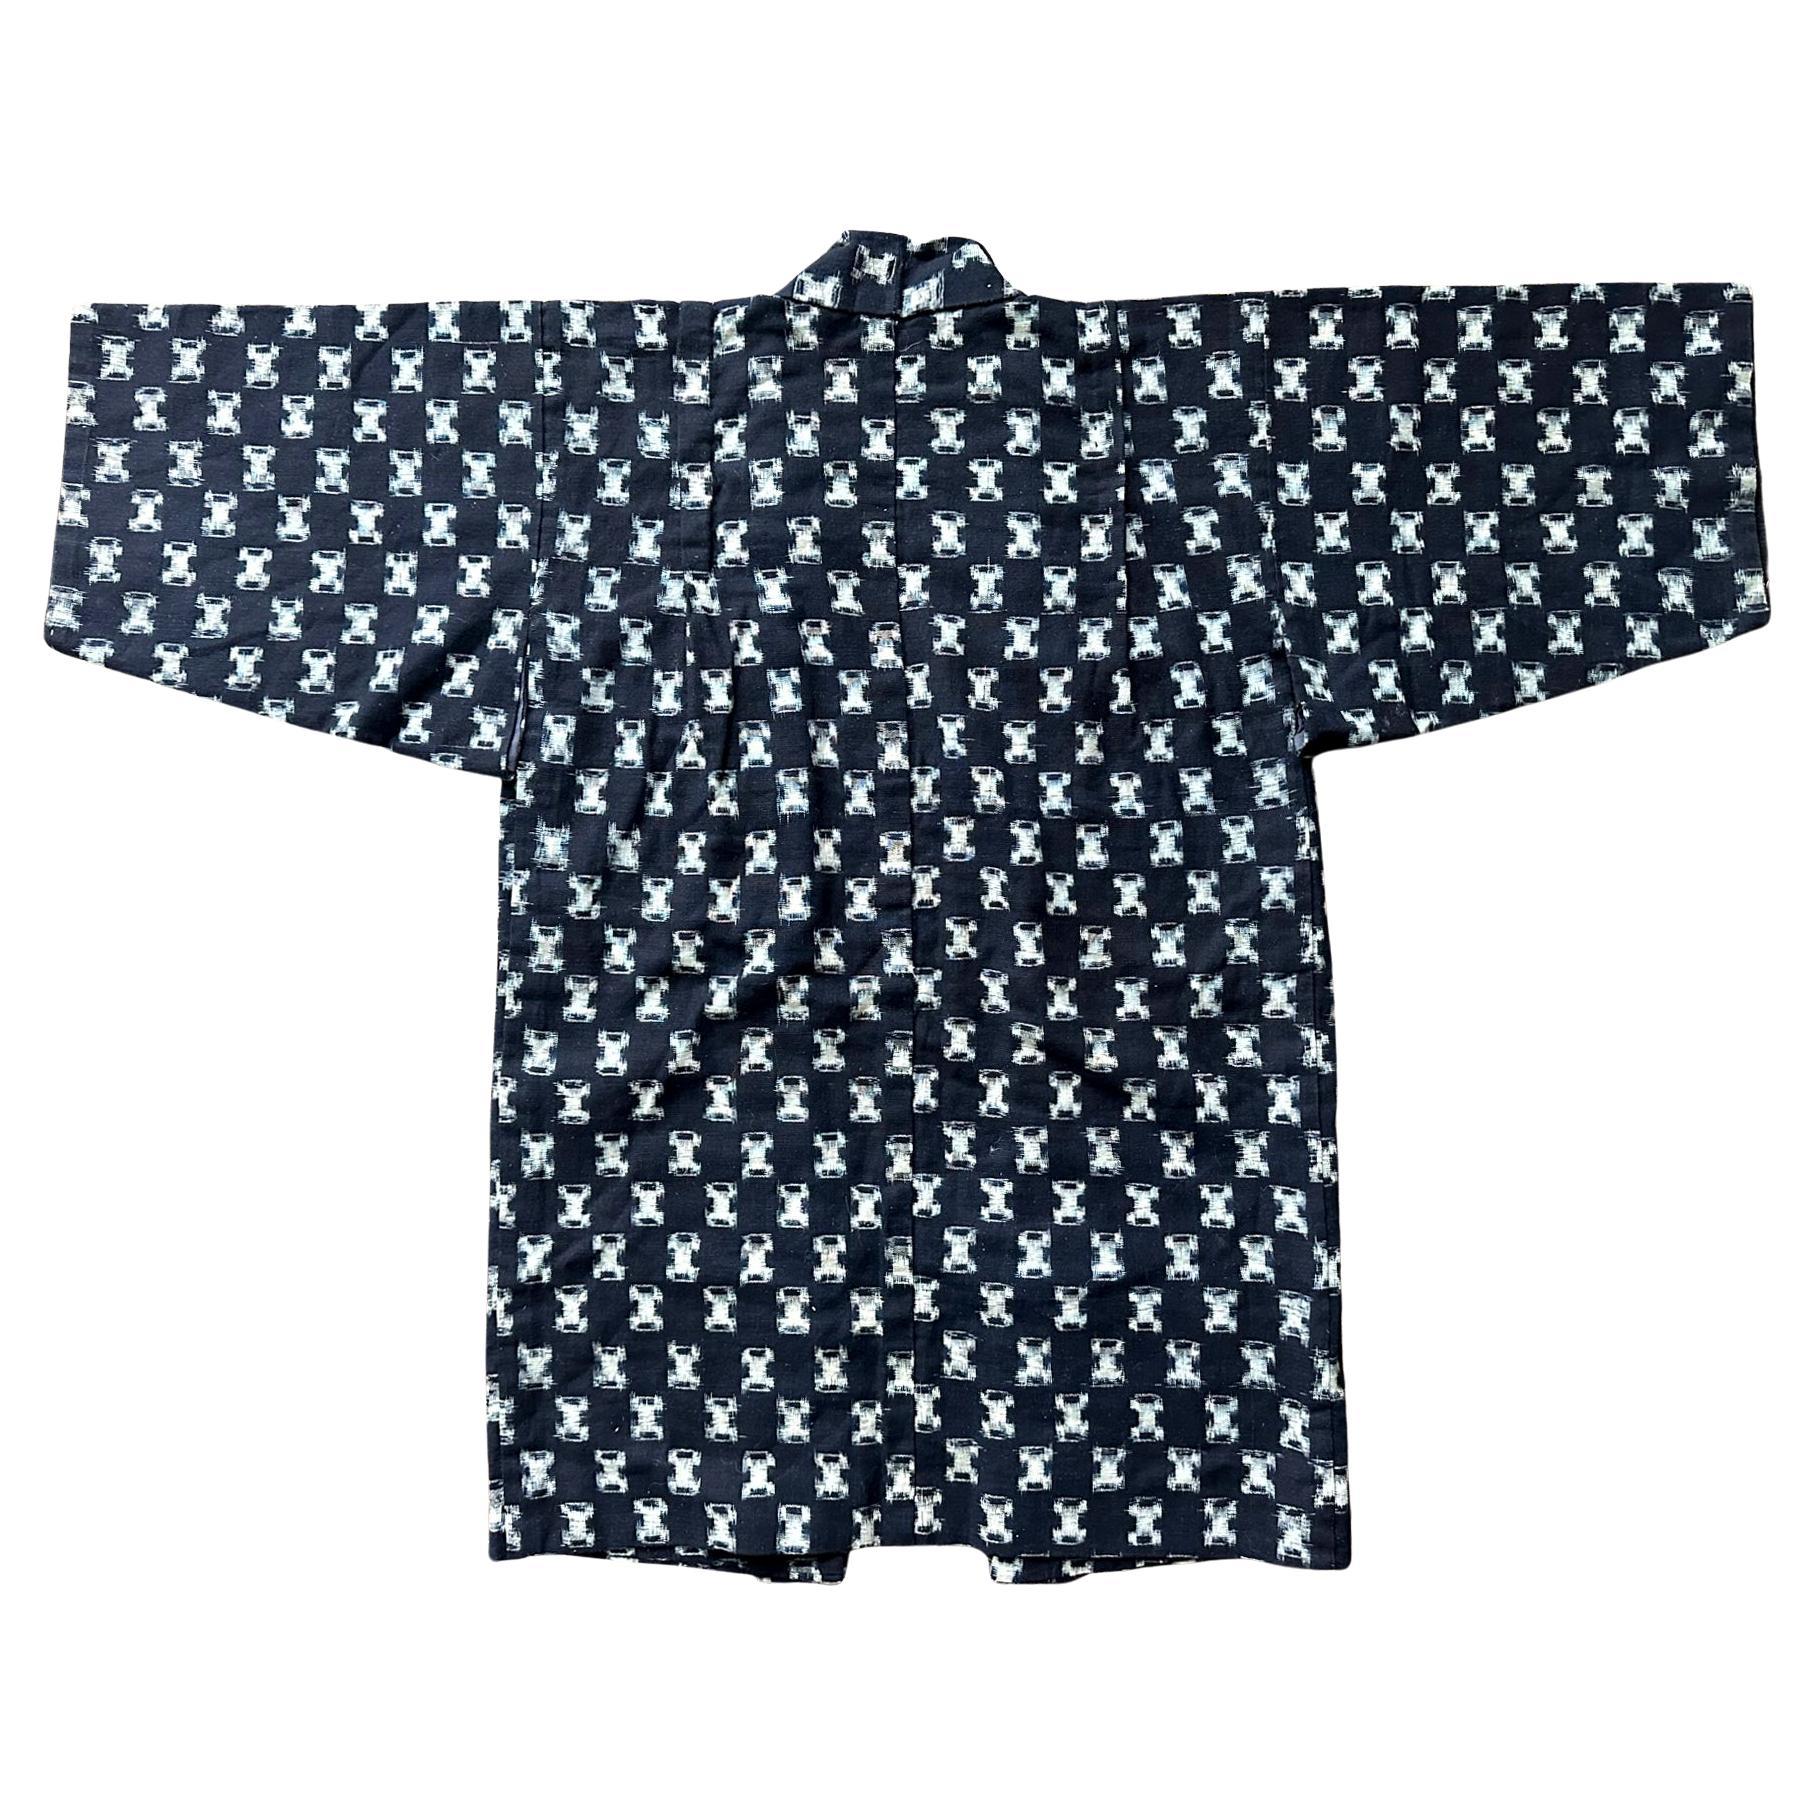 A rare and well preserved Japanese woven child's kimono circa early 20th century (end of Meiji period). The small kimono was a great example of Nemaki (sleepwear) for a young boy, identified by its size and distinct attached and tapered sleeves with